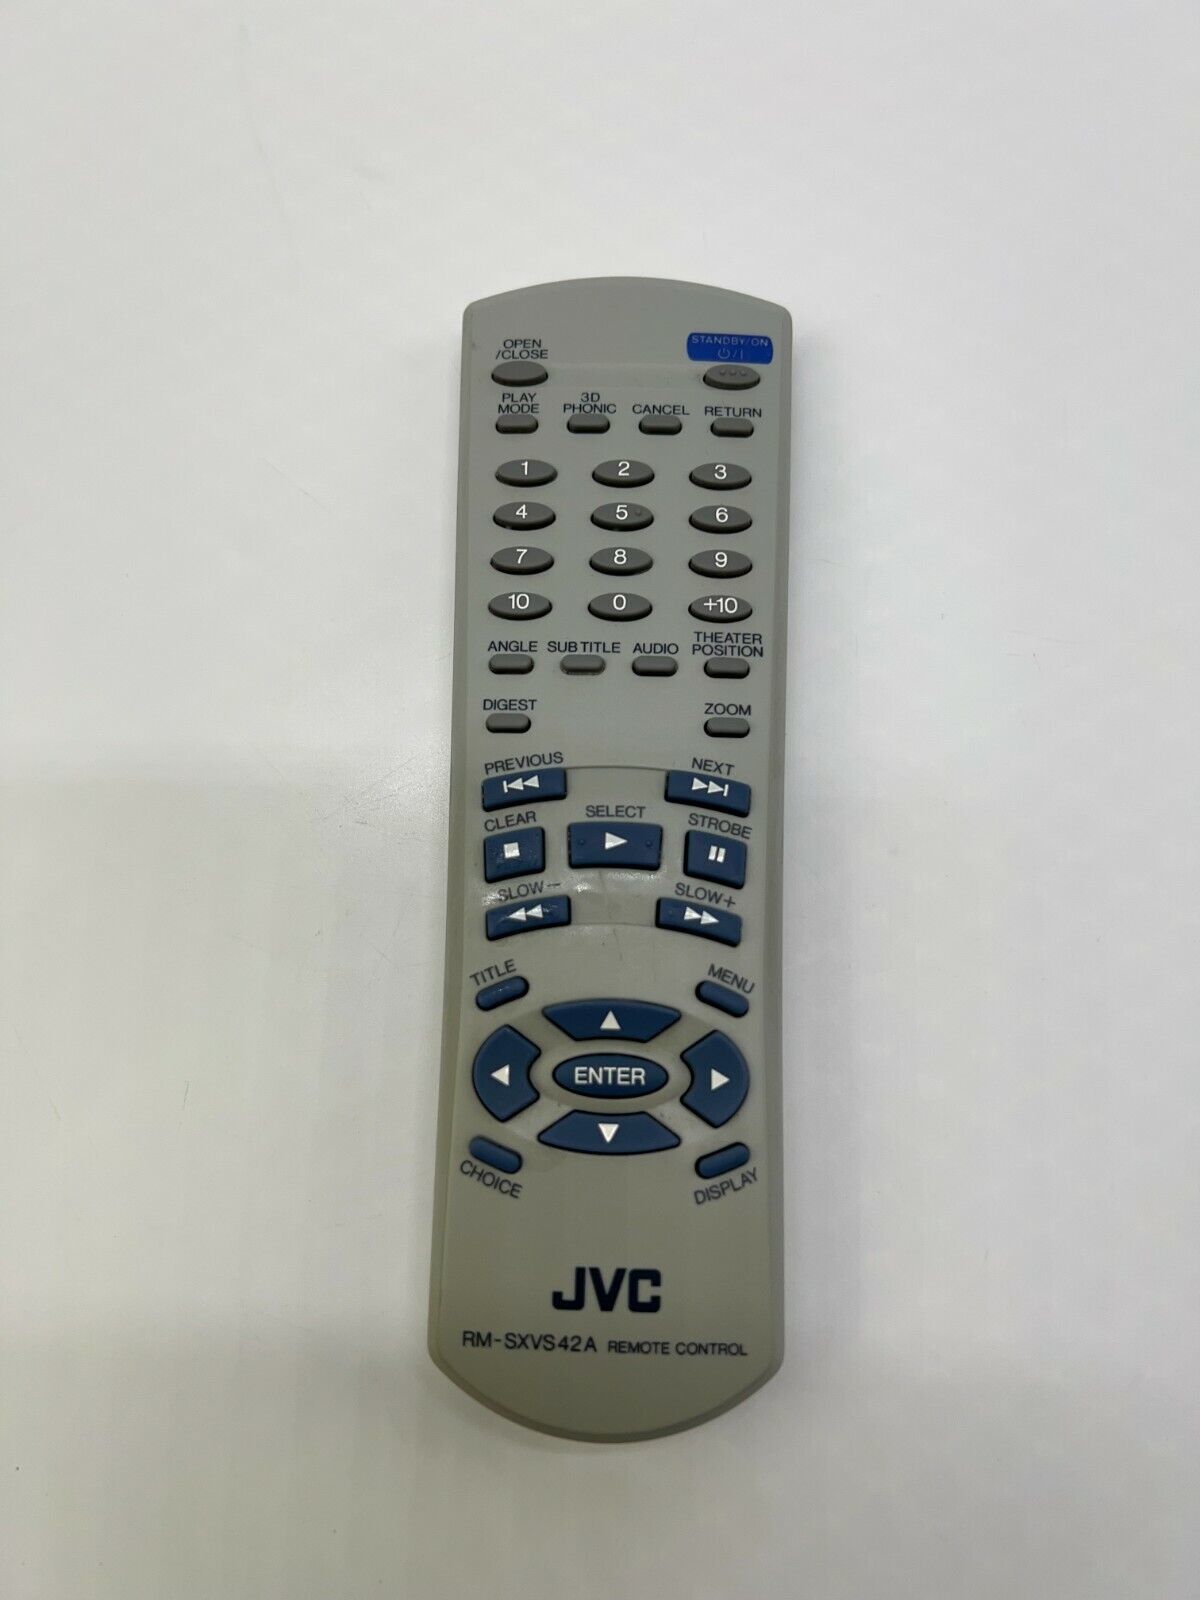 Primary image for JVC RM-SXVS42A  Remote Control w/Battery Cover. Tested.